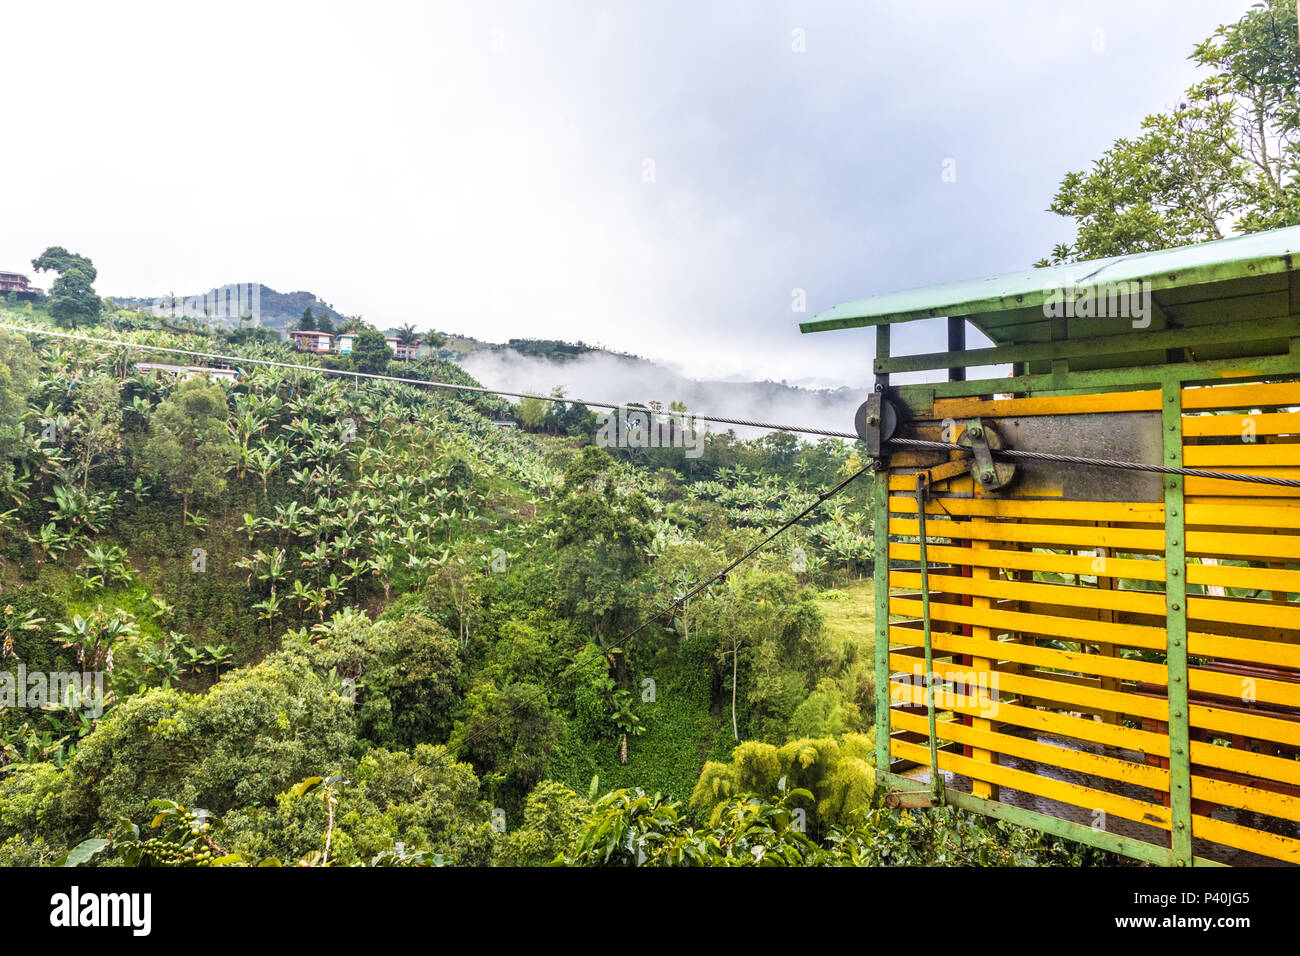 the colorful picturesque town of Jardin in Colombia Stock Photo